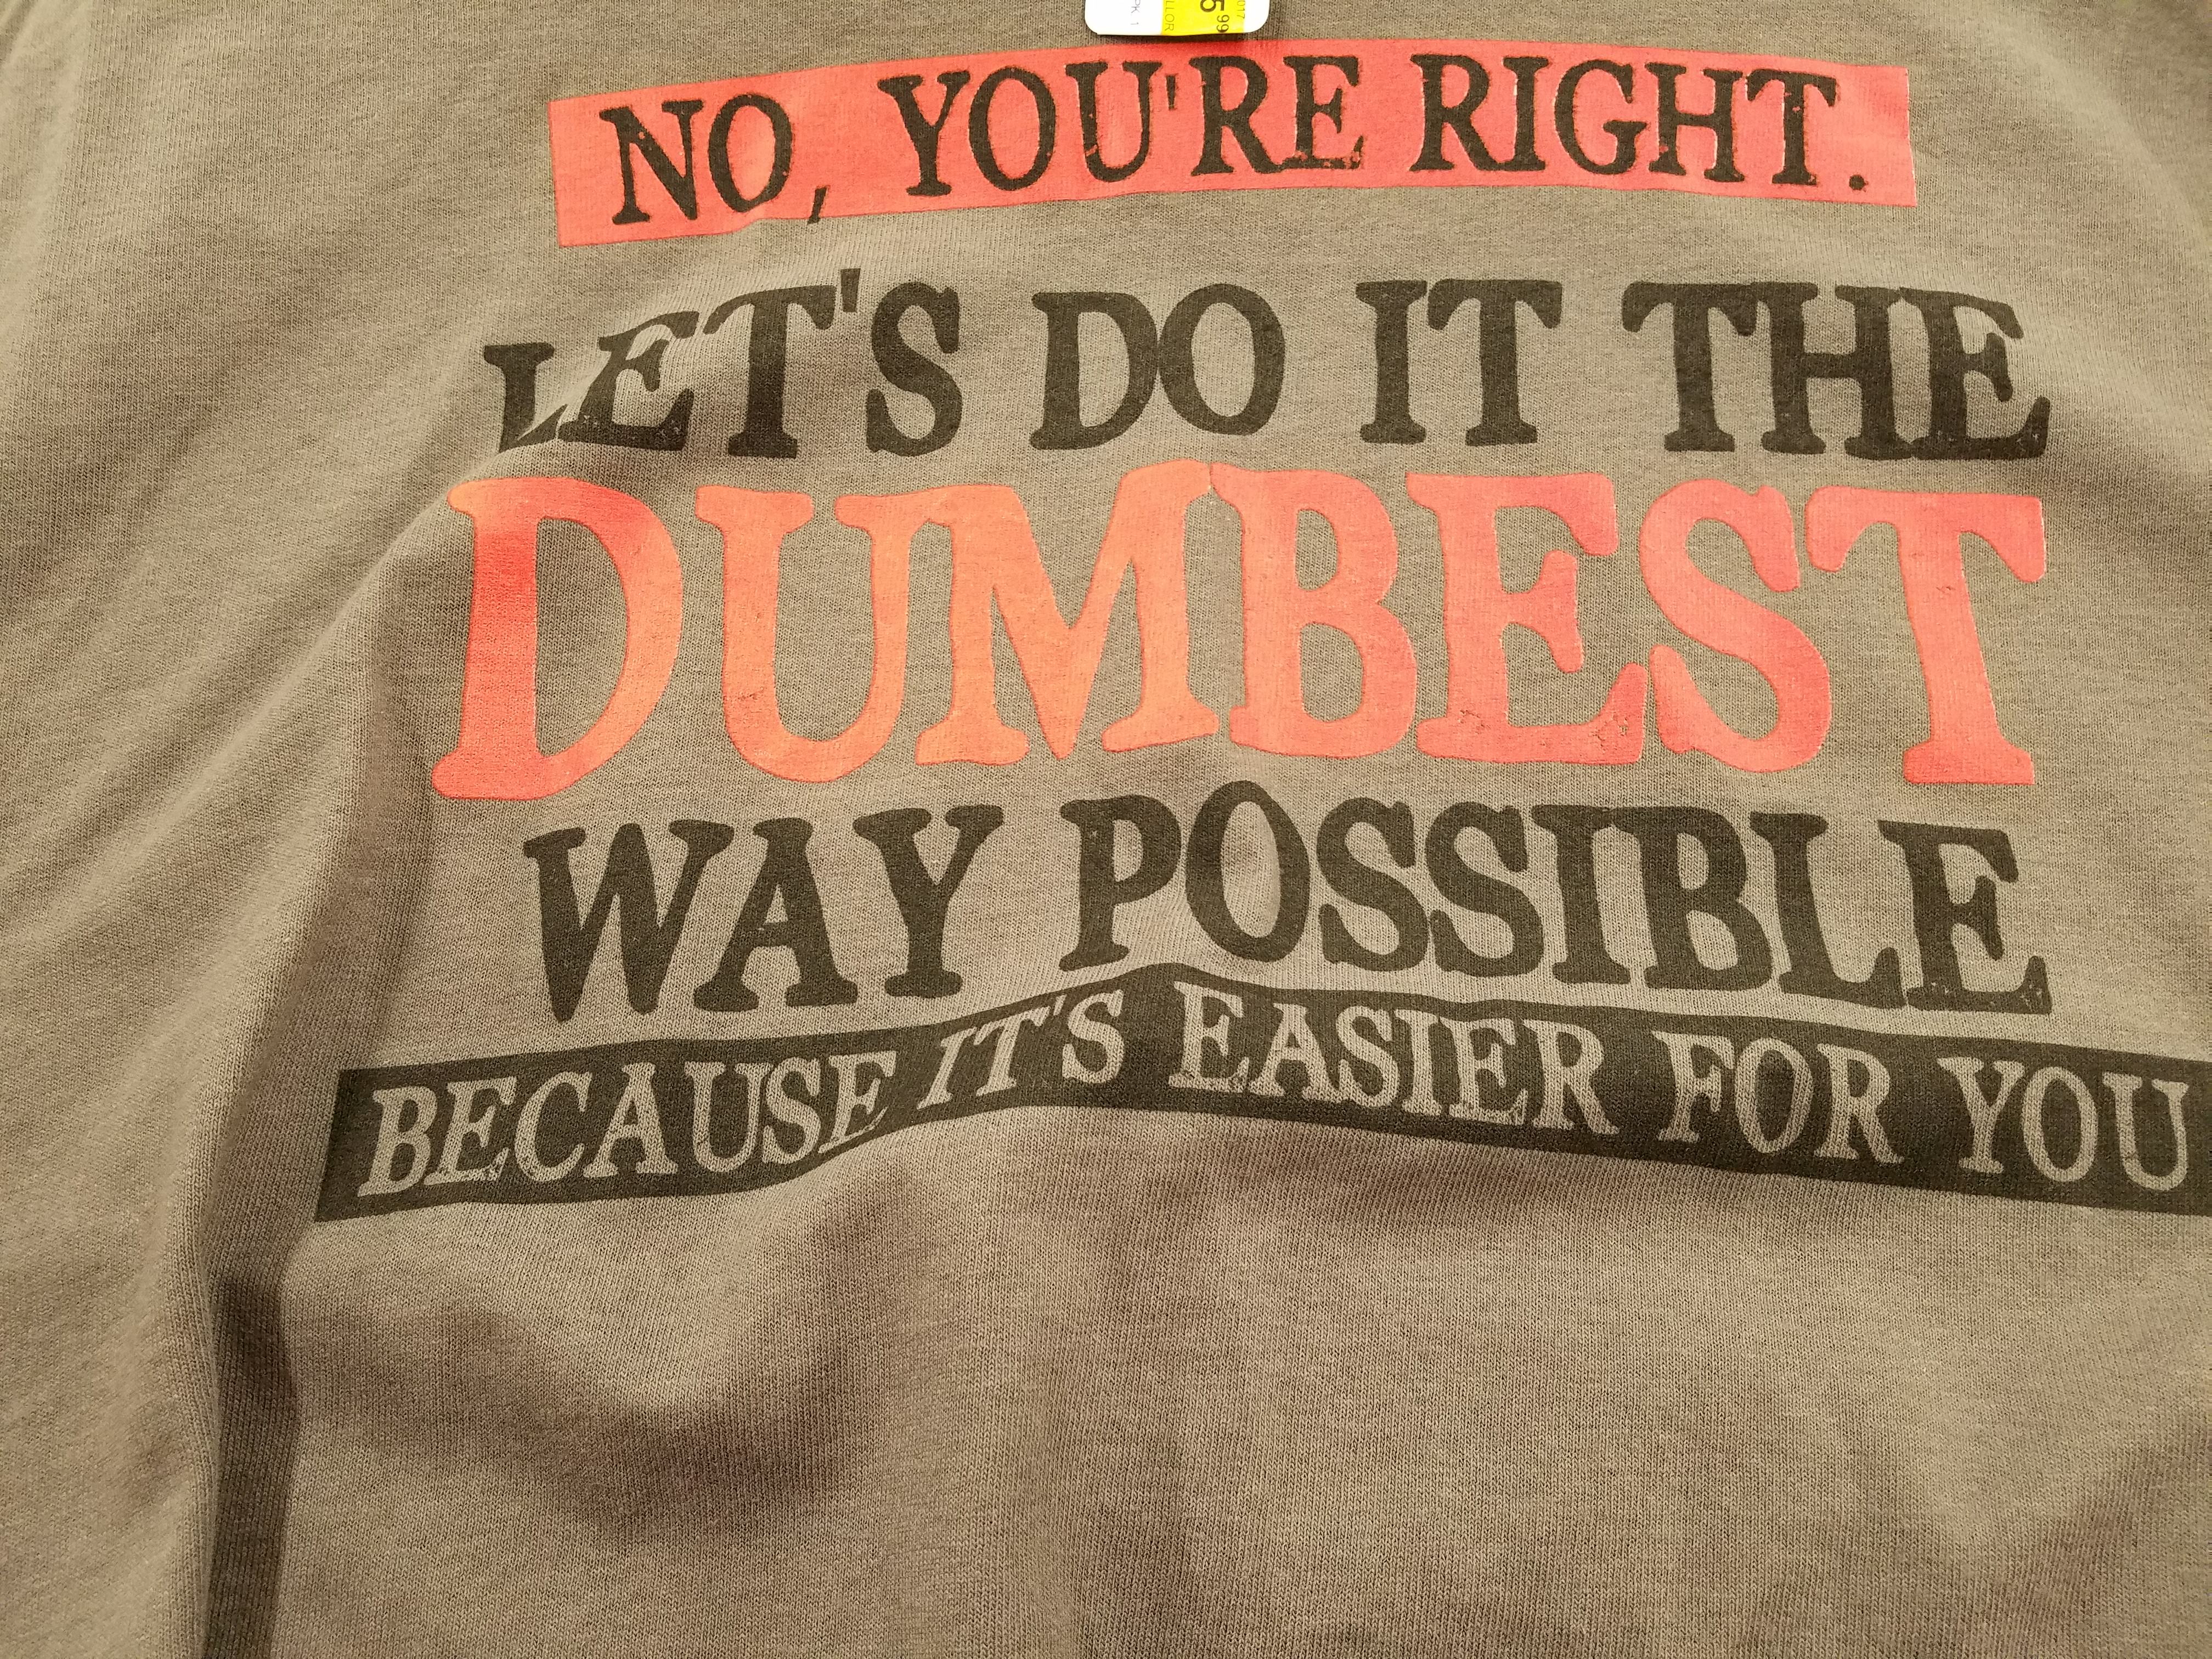 t shirt - No, You'Re Right. Let'S Do It The Dumbest Way Possible It'S Easier For You Because Its Easter